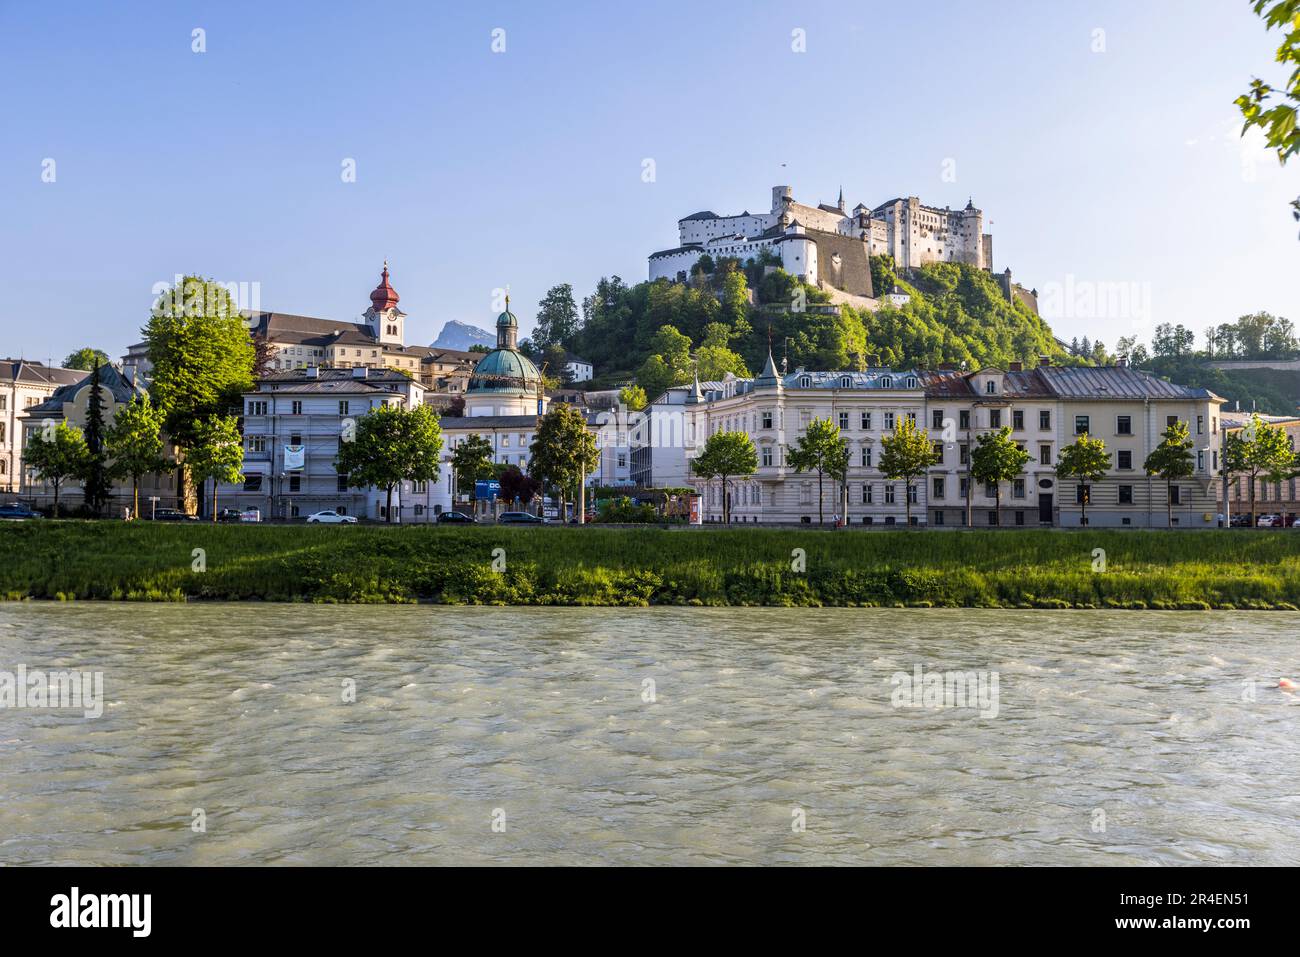 The banks of the Salzach River with views of the Hohensalzburg fortress and cathedral quatier is a popular picnic spot for couples in Salzburg, Austria Stock Photo